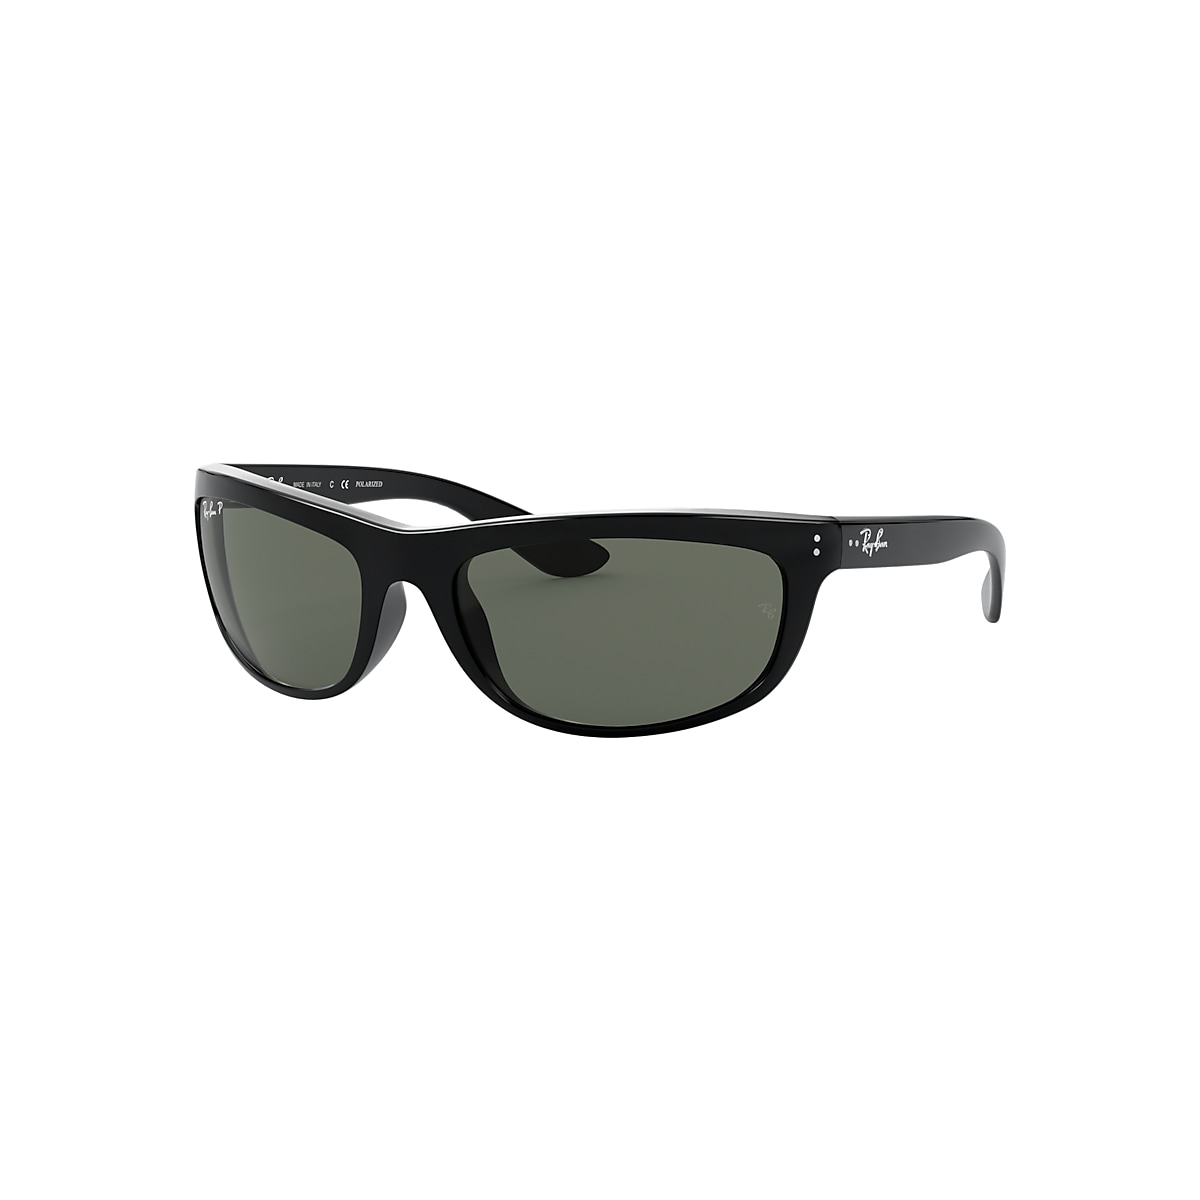 Hysterisch Kast Formuleren Balorama Sunglasses in Black and Green | Ray-Ban®